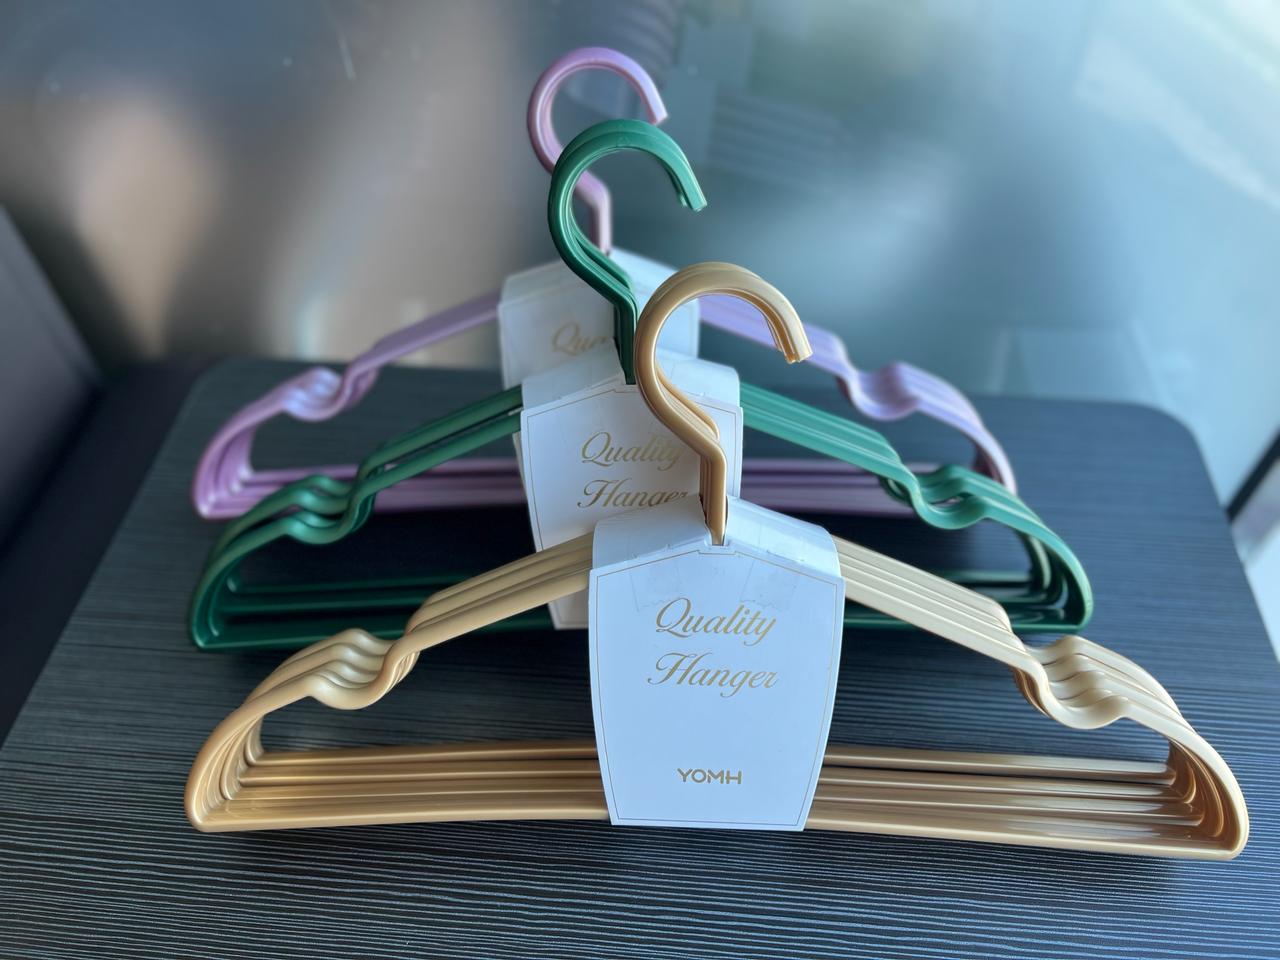 Sleek Plastic Hangers in Gold, Rose, and Emerald - 5-Pack for Closet Efficiency